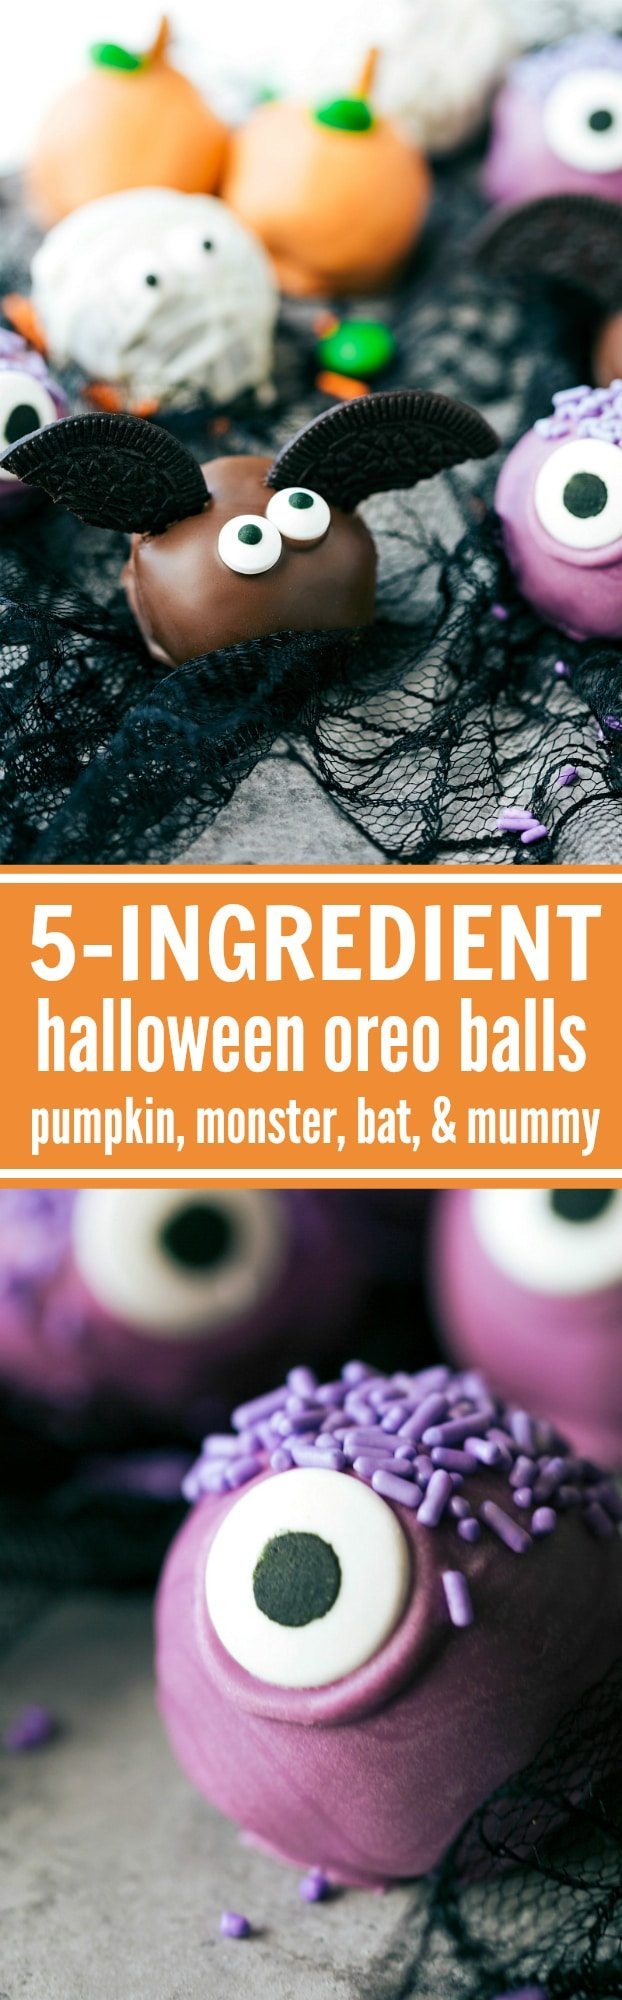 4 adorable and festive Halloween Oreo Balls monsters, pumpkins, bats, and mummies; each made with 5 ingredients or less! via chelseasmessyapron.com